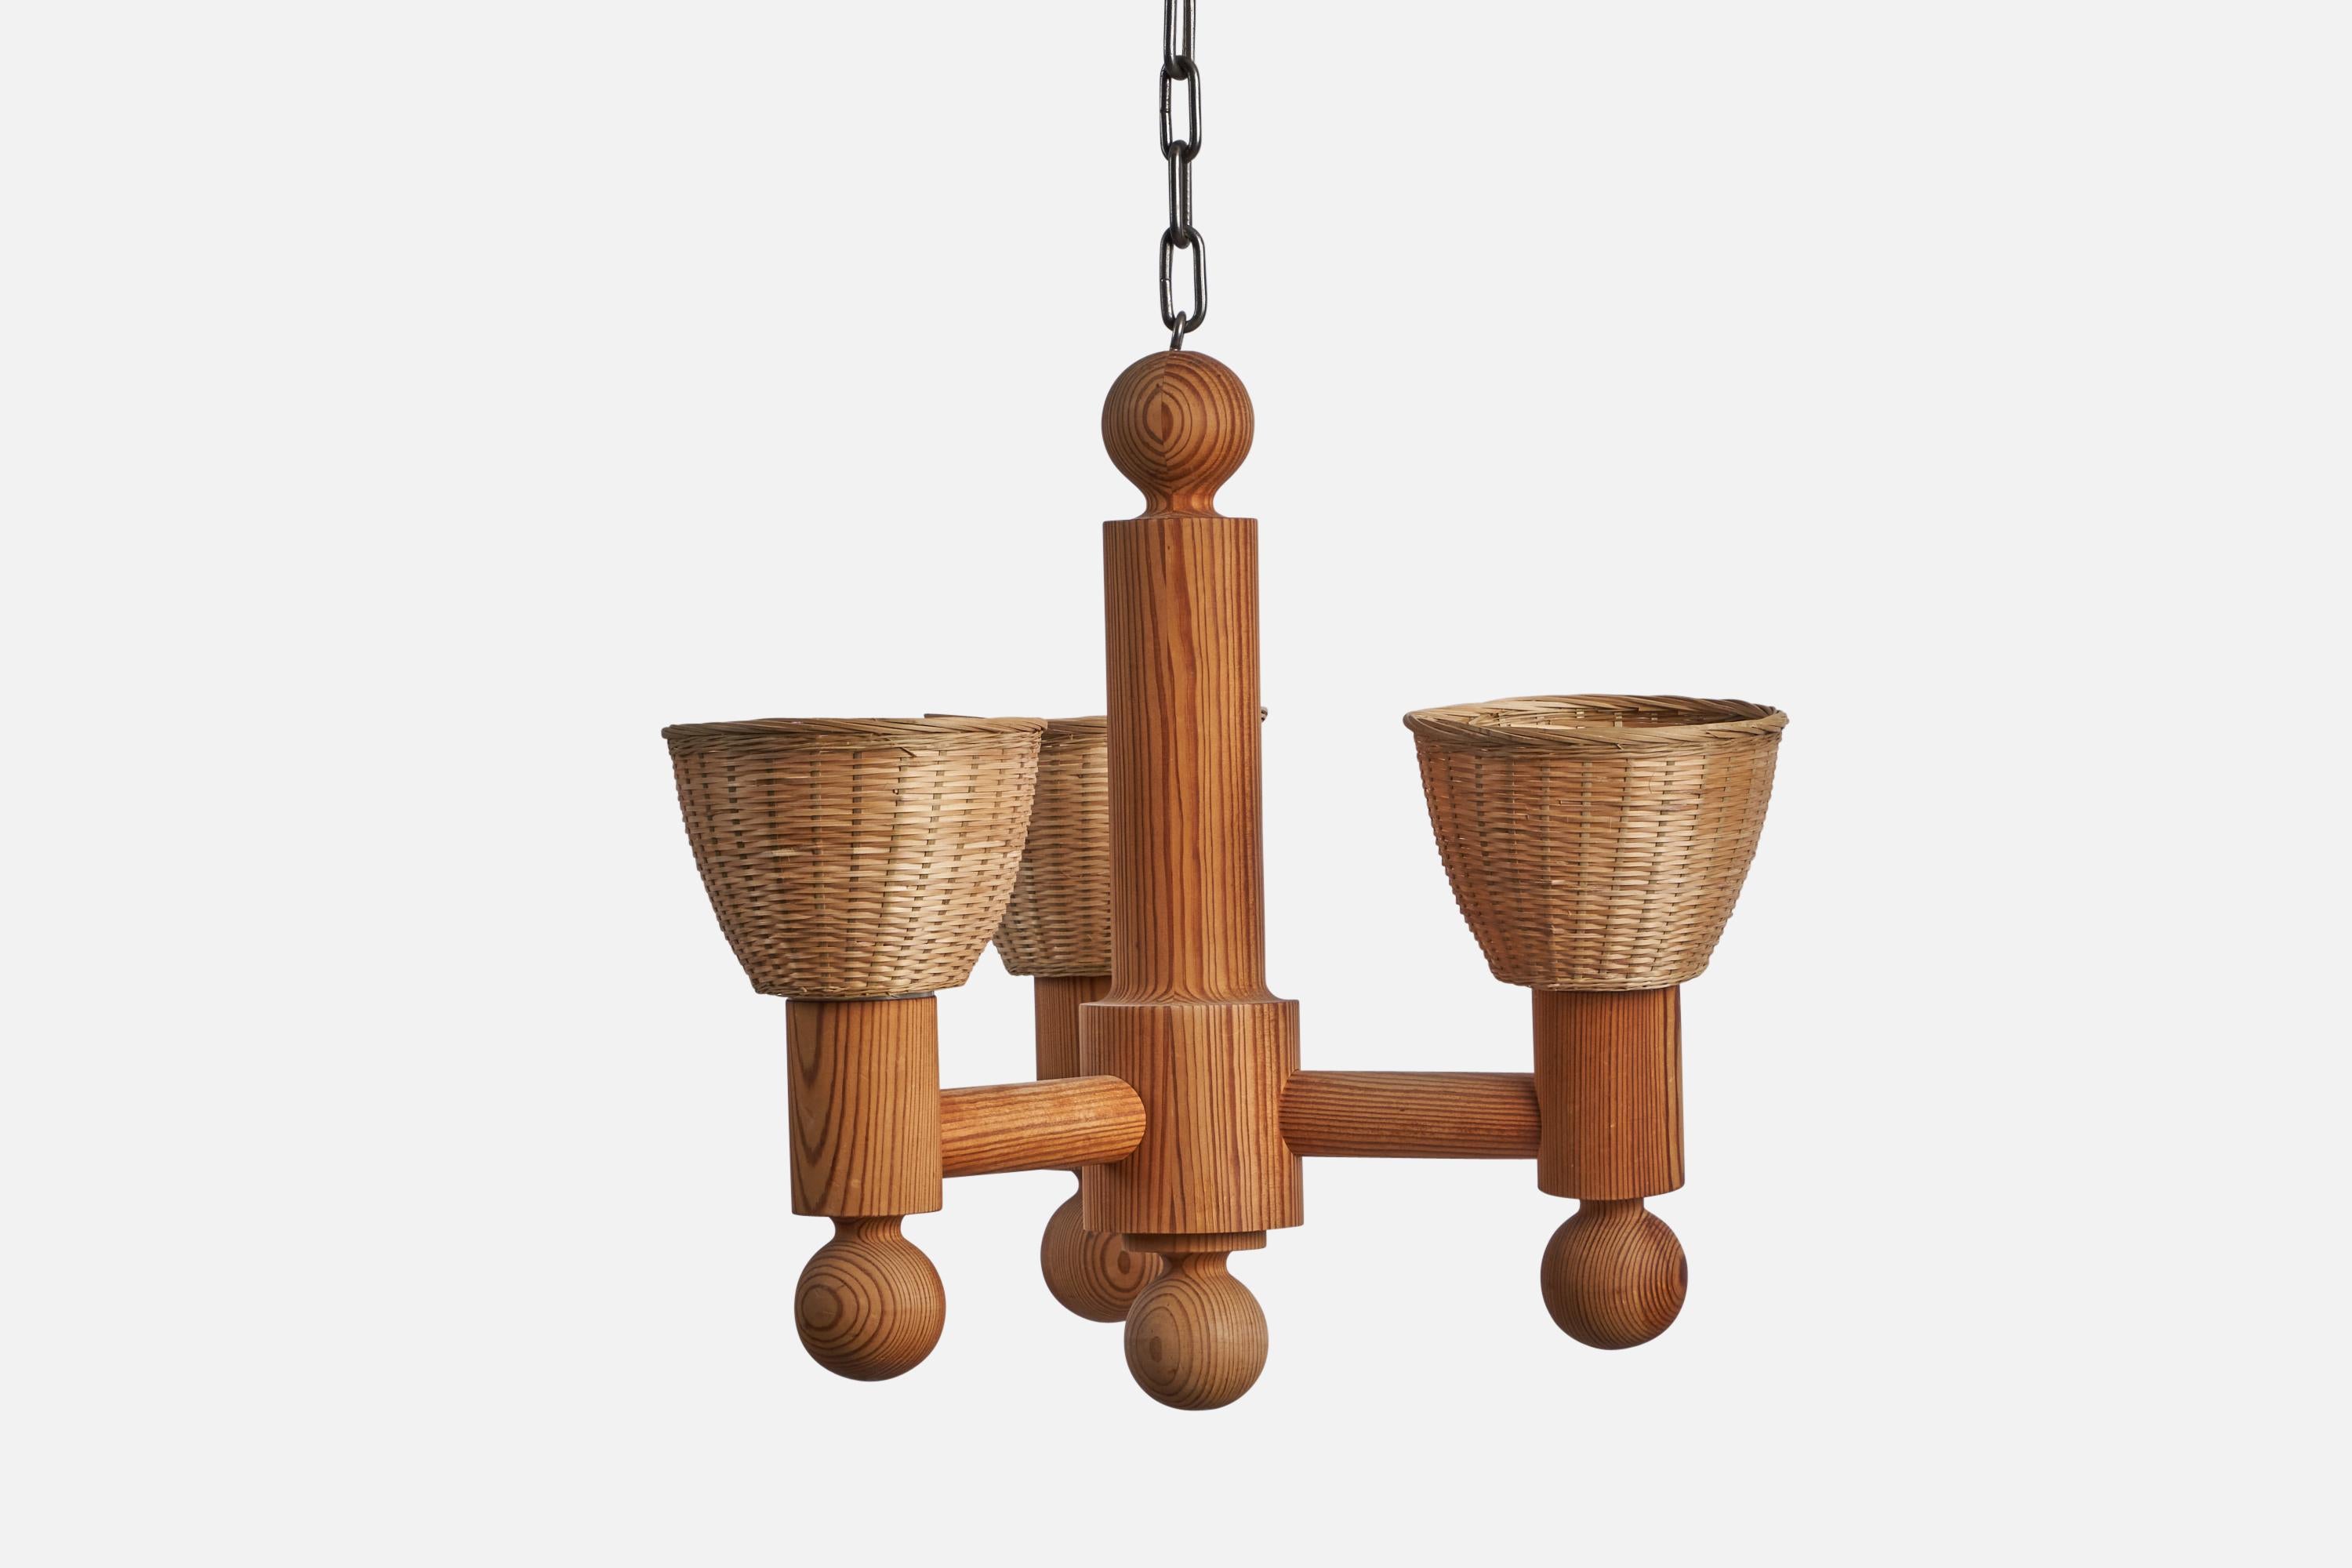 A three-armed pine and rattan chandelier designed by Uno Kristiansson and produced by Luxus Vittsjö, Sweden, 1970s

Overall Dimensions (inches): 19” H x 20.5” Diameter
Chain Drop Length (inches): 26” L
Bulb Specifications: E-26 Bulb
Number of